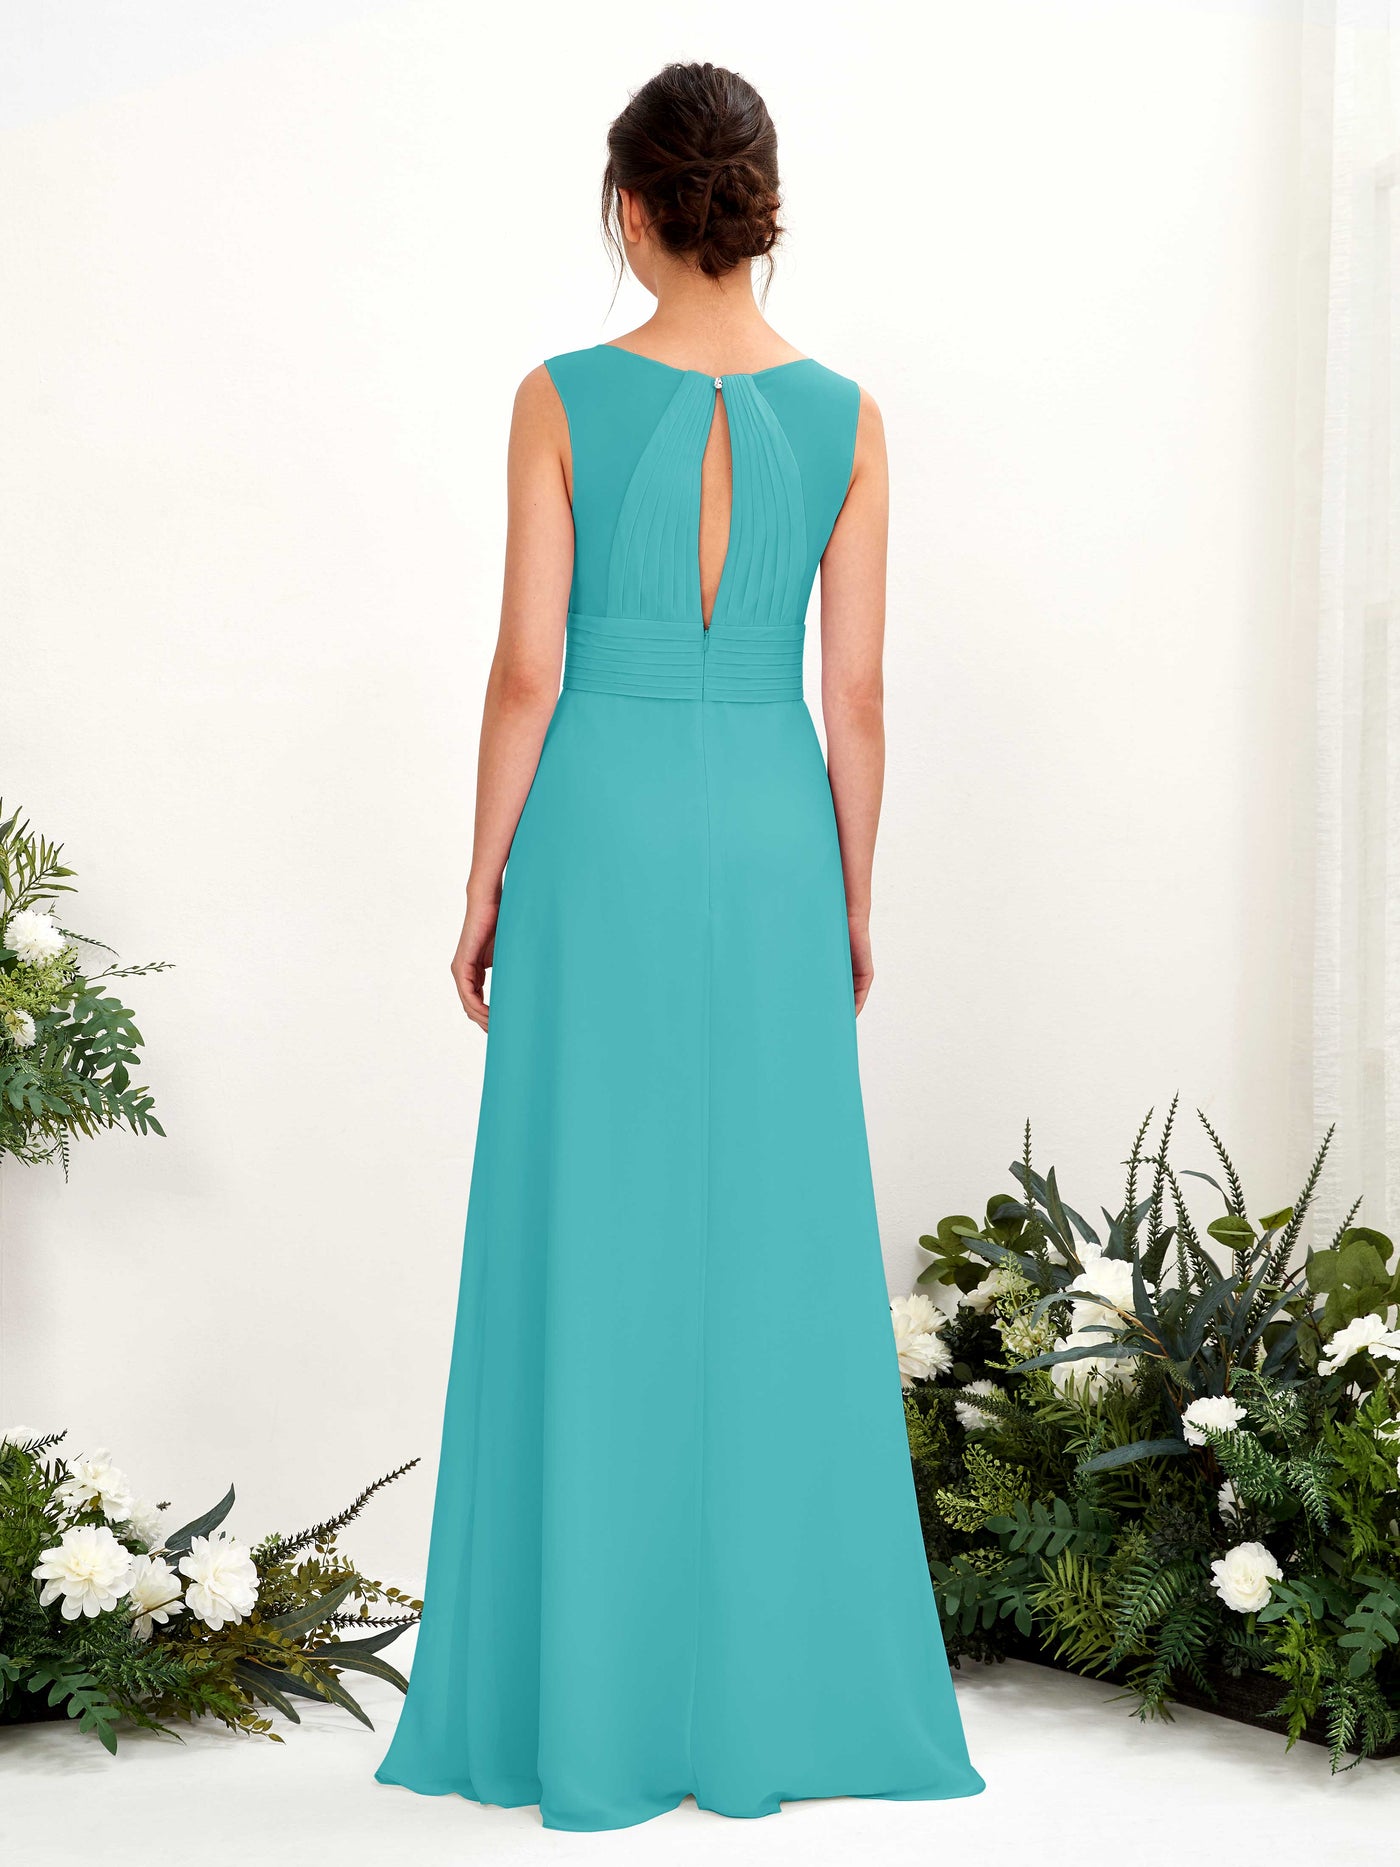 Turquoise Bridesmaid Dresses Bridesmaid Dress A-line Chiffon Straps Full Length Sleeveless Wedding Party Dress (81220923)#color_turquoise